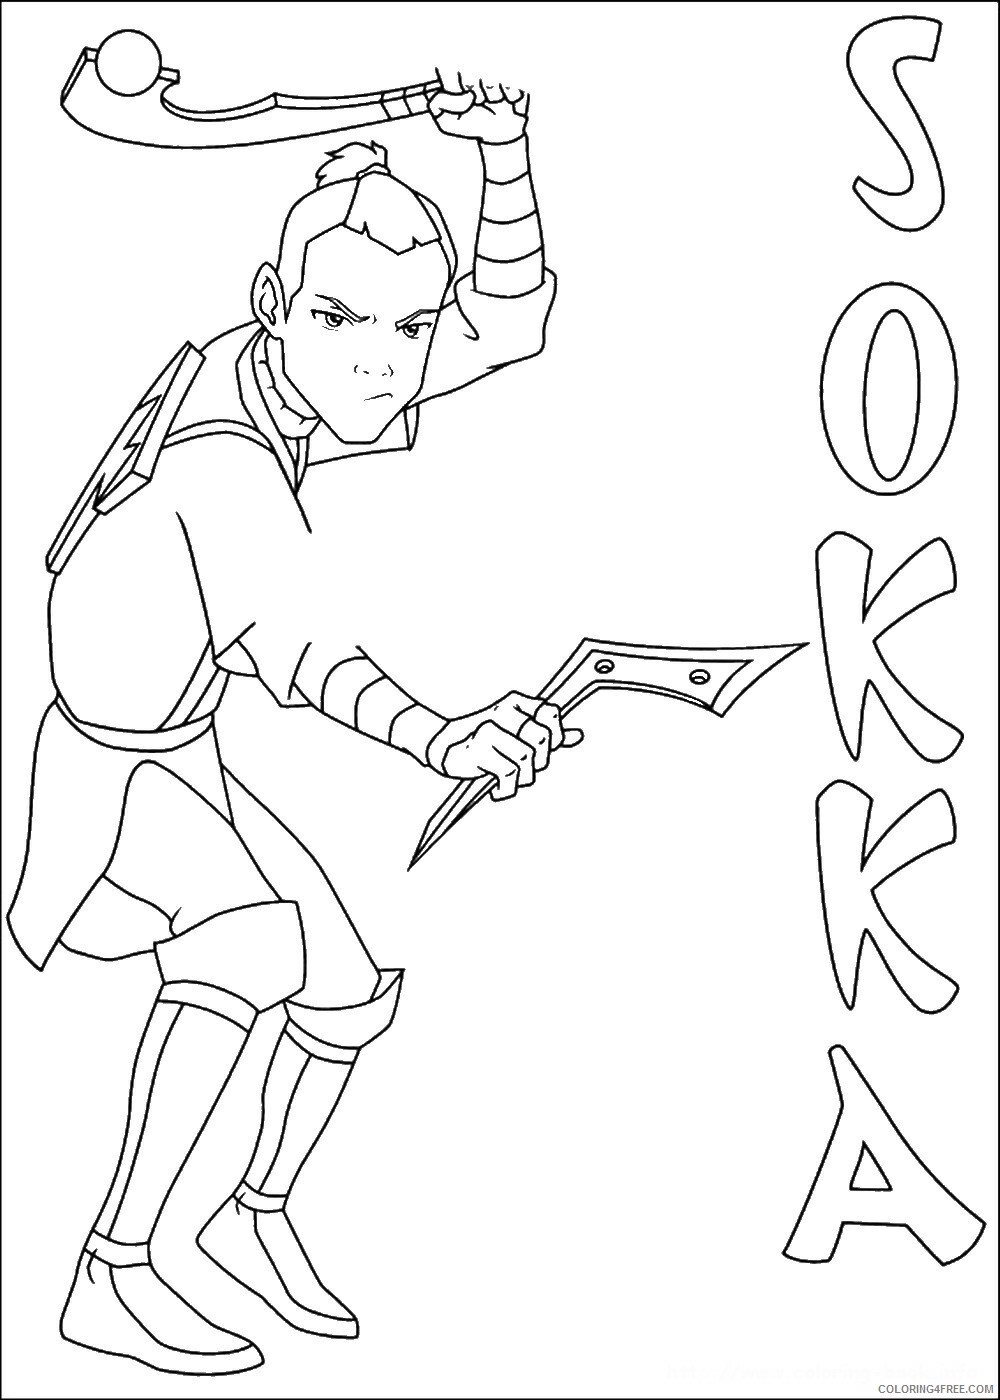 Avatar the Last Airbender Coloring Pages TV Film avatar_cl144 Printable 2020 00302 Coloring4free